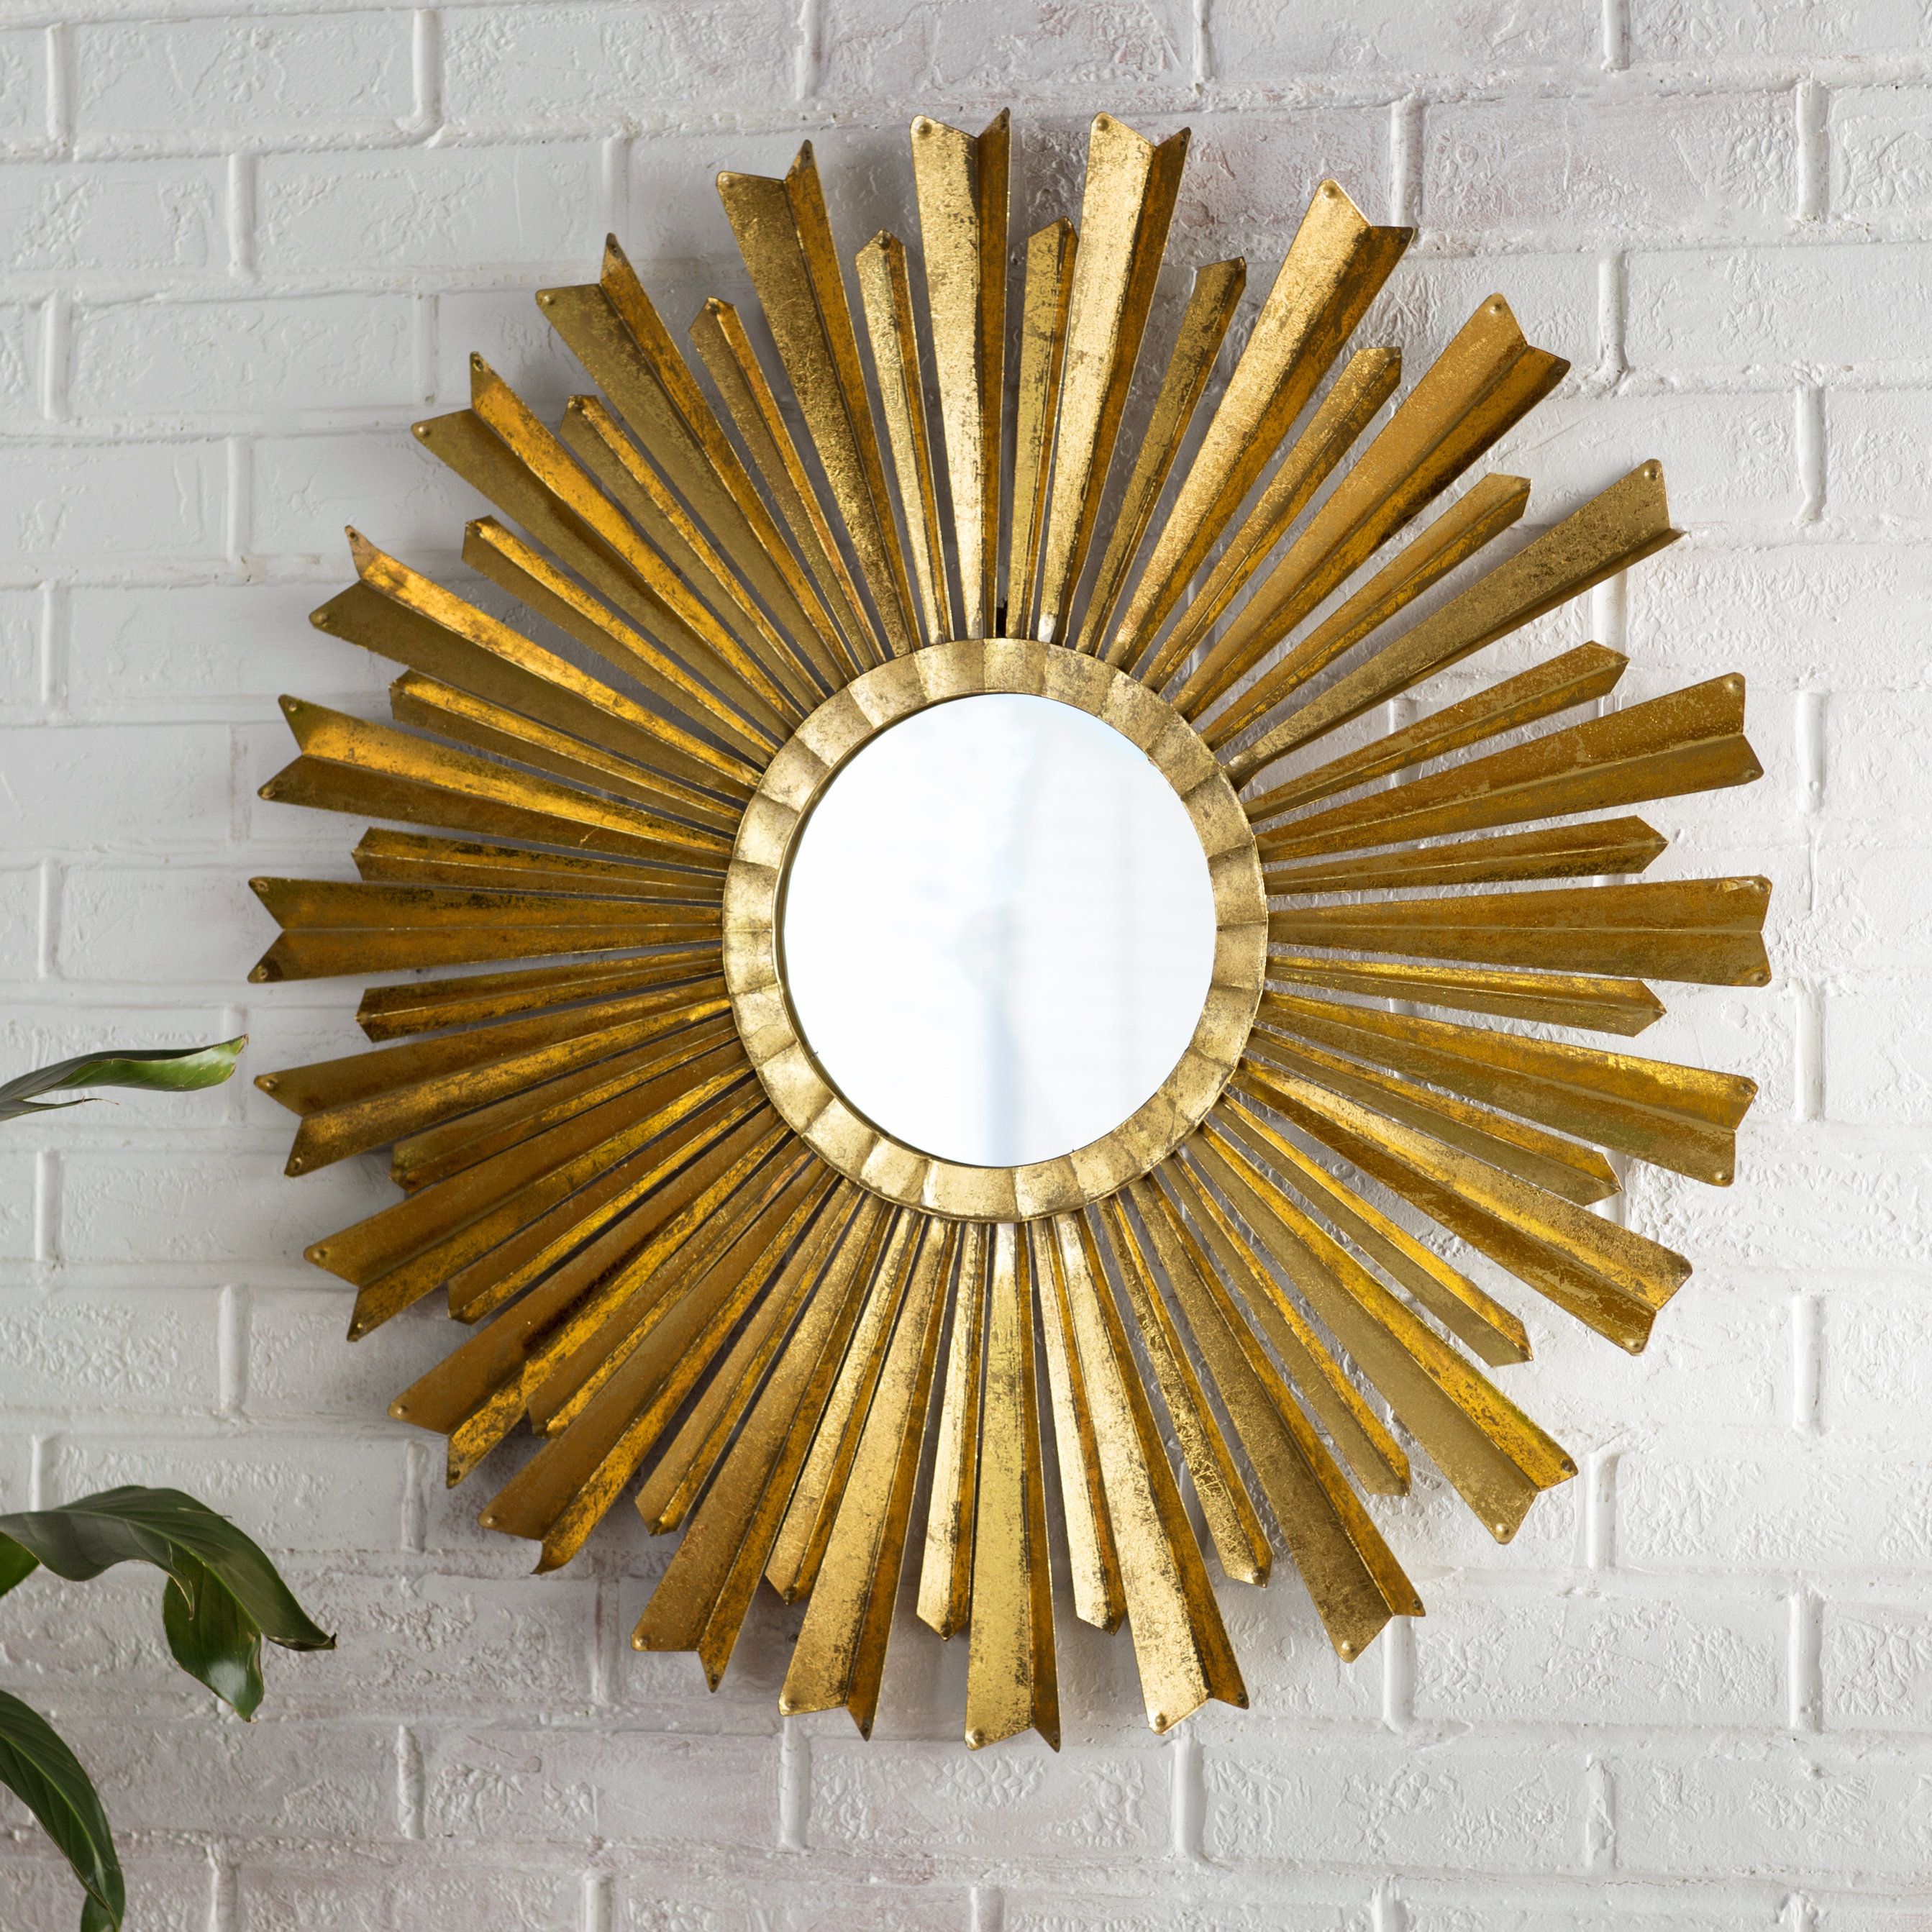 Large & Oversized Sunburst Mirrors You'll Love In 2019 | Wayfair With Regard To Brylee Traditional Sunburst Mirrors (View 8 of 20)